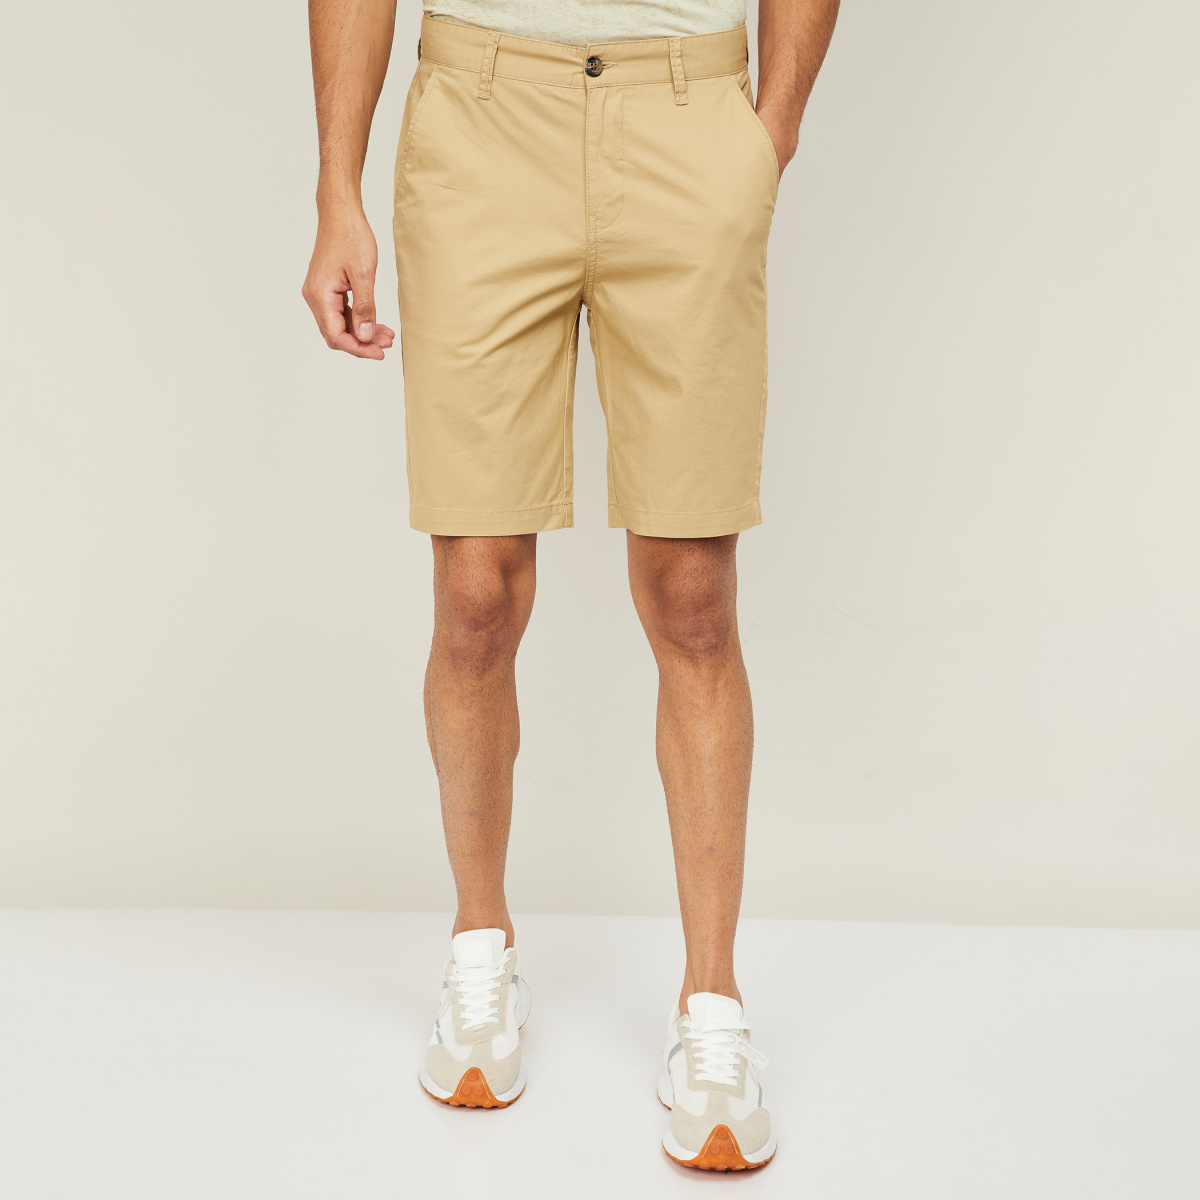 UNITED COLORS OF BENETTON Men Solid Slim Fit Casual Shorts